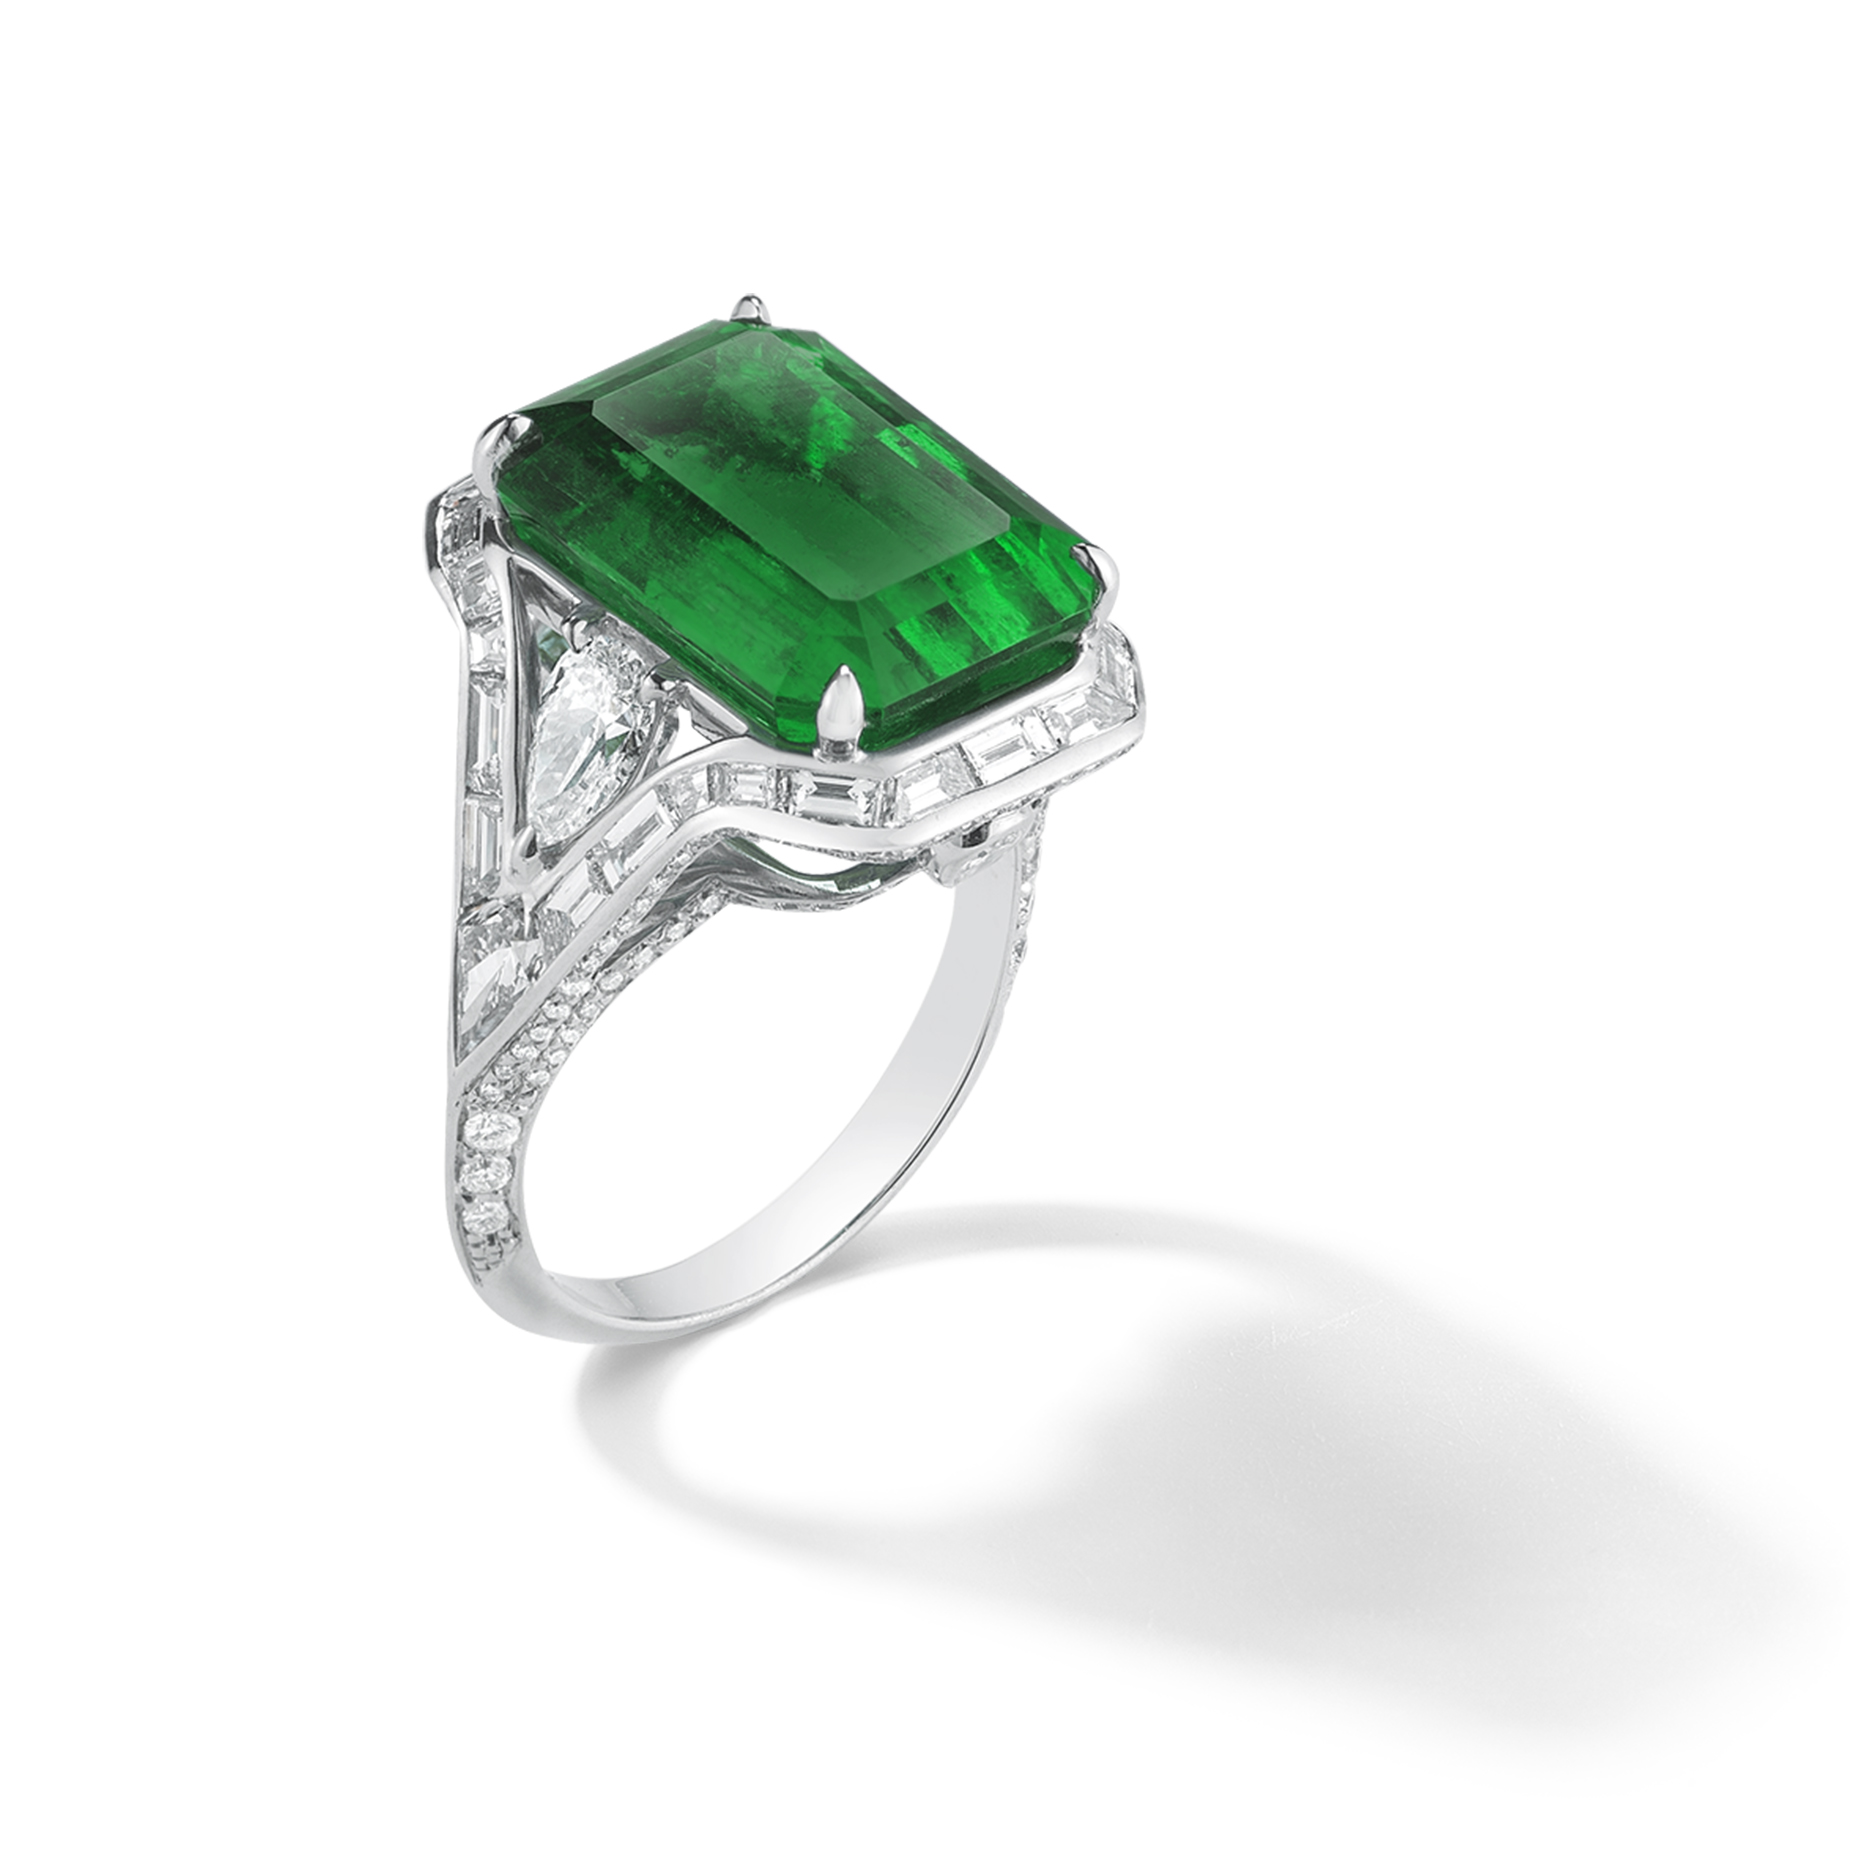 Valani Atelier Bespoke Emerald Jewelry is the Perfect Gift for Mother’s Day